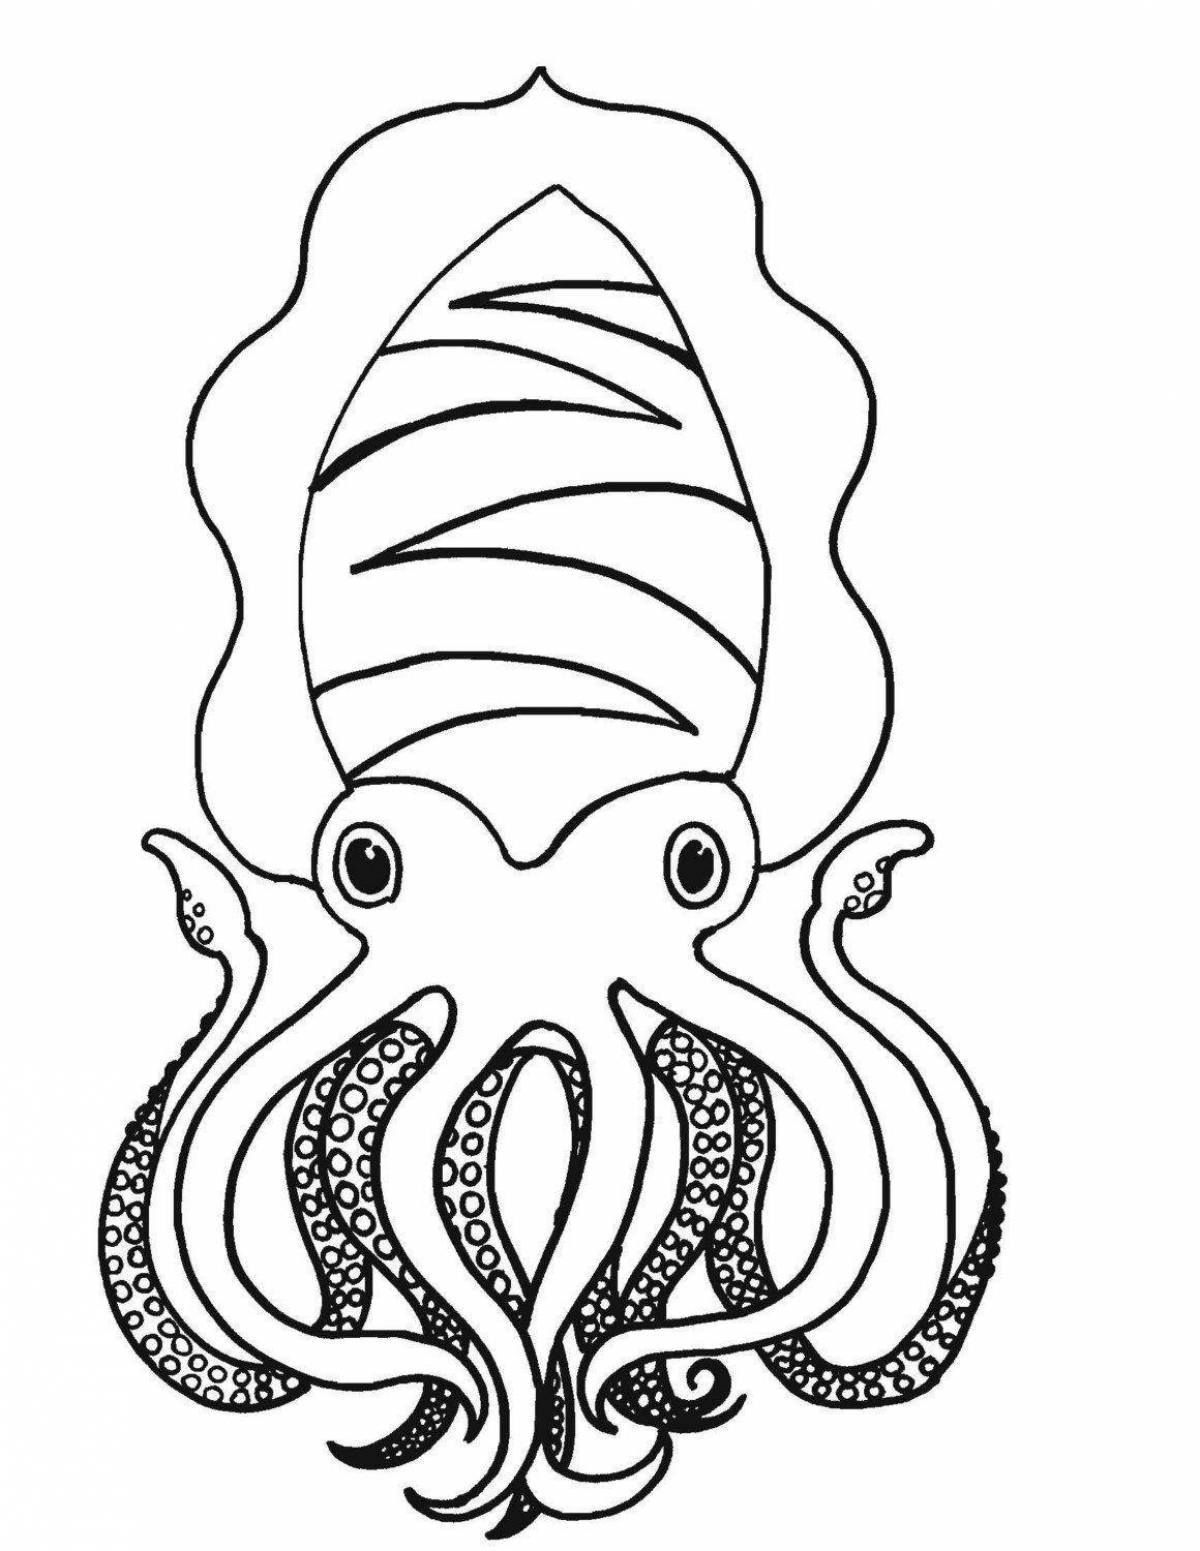 Nice squid coloring for kids